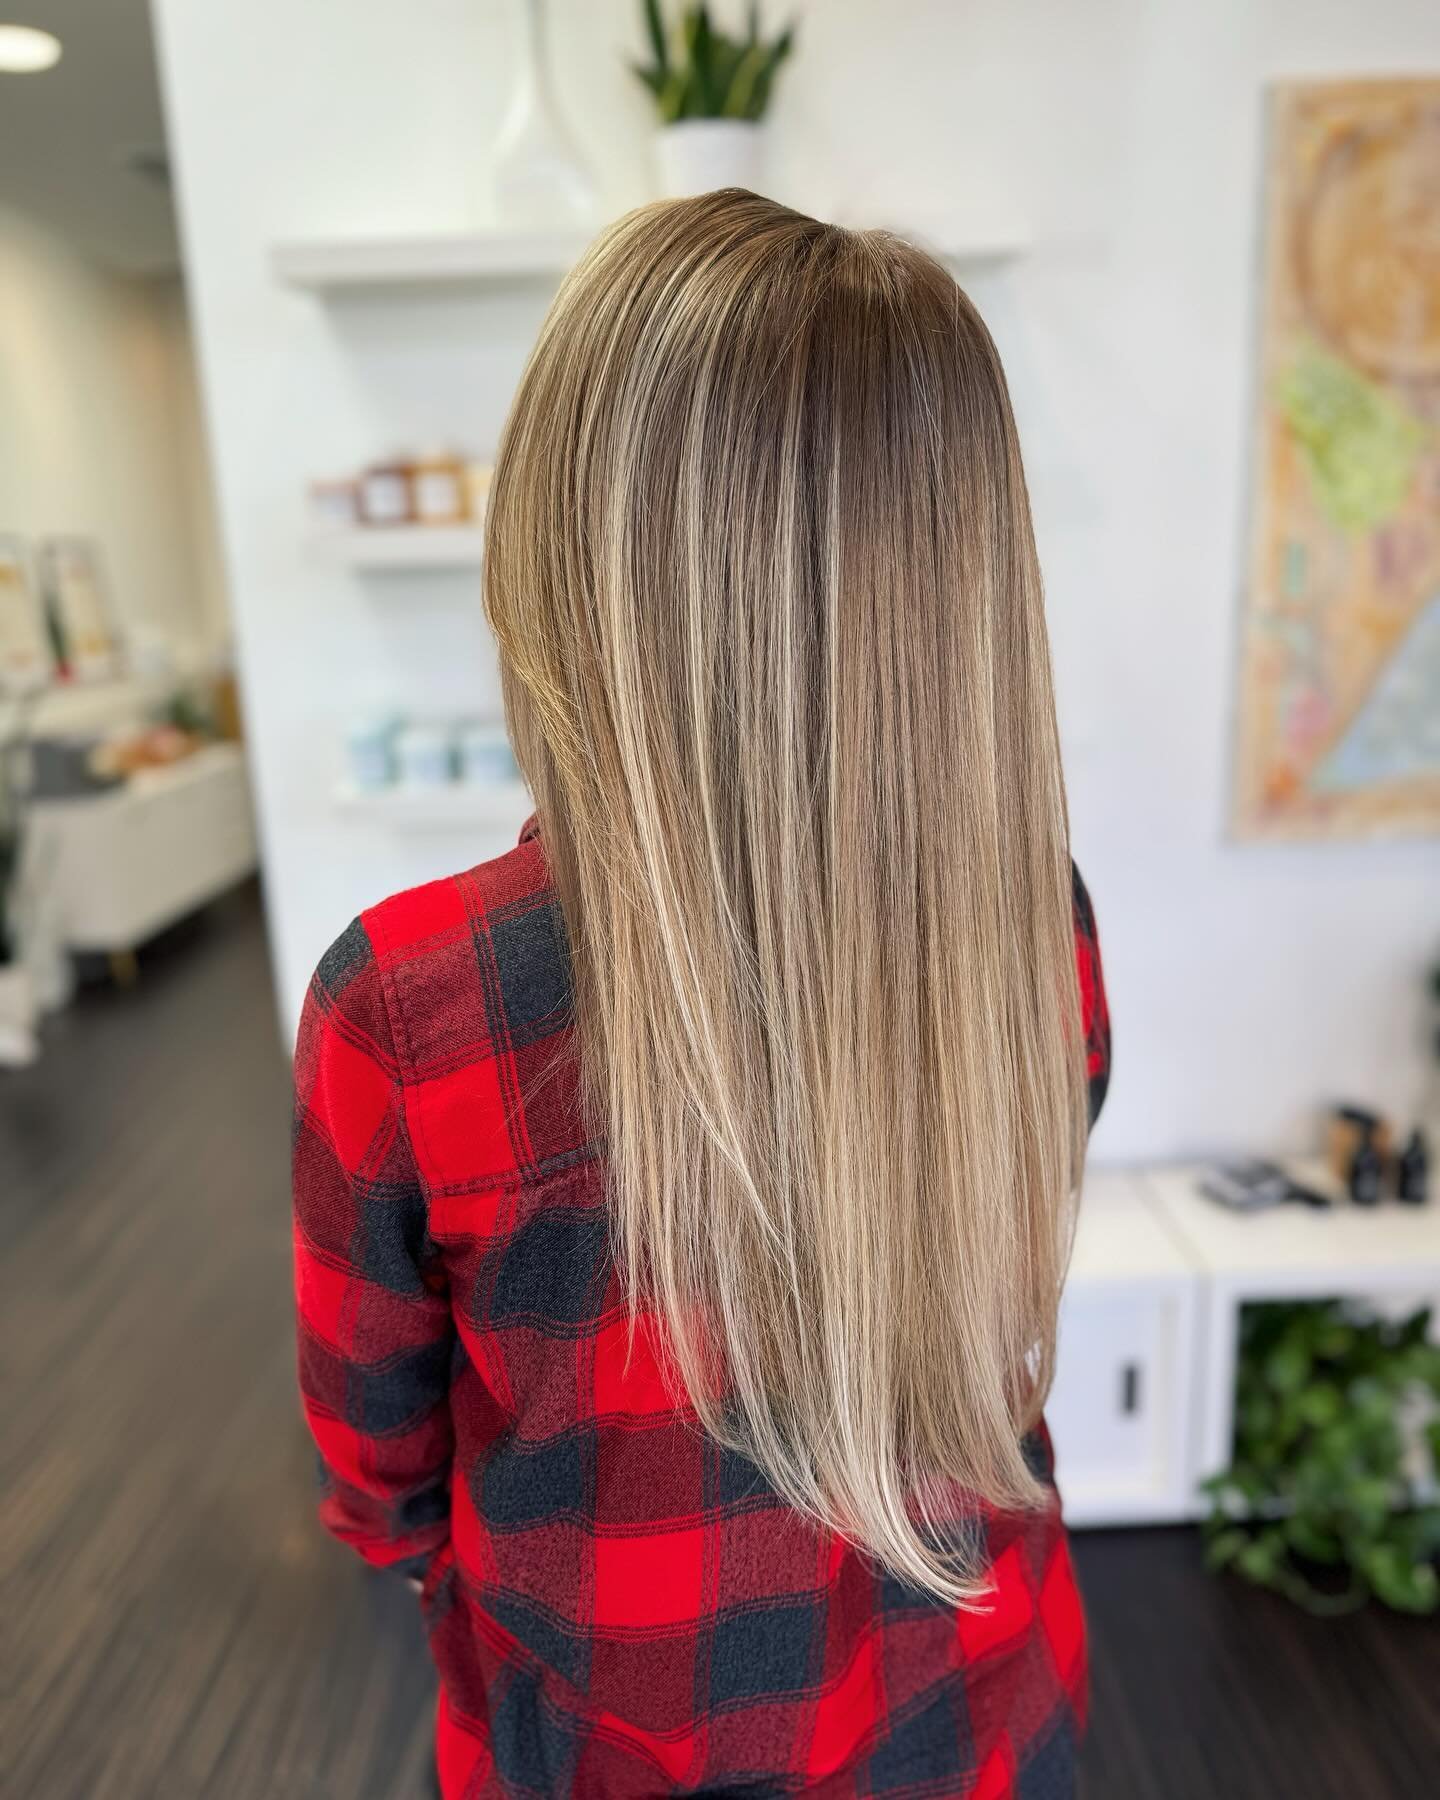 All balayage is customizable to your needs, and our blonding experts are here to help. We are *obsessed* with this subtle, beige tone because it perfectly complements our lovely client&rsquo;s natural color.

&gt;&gt;&gt;&gt; Swipe to see the before!